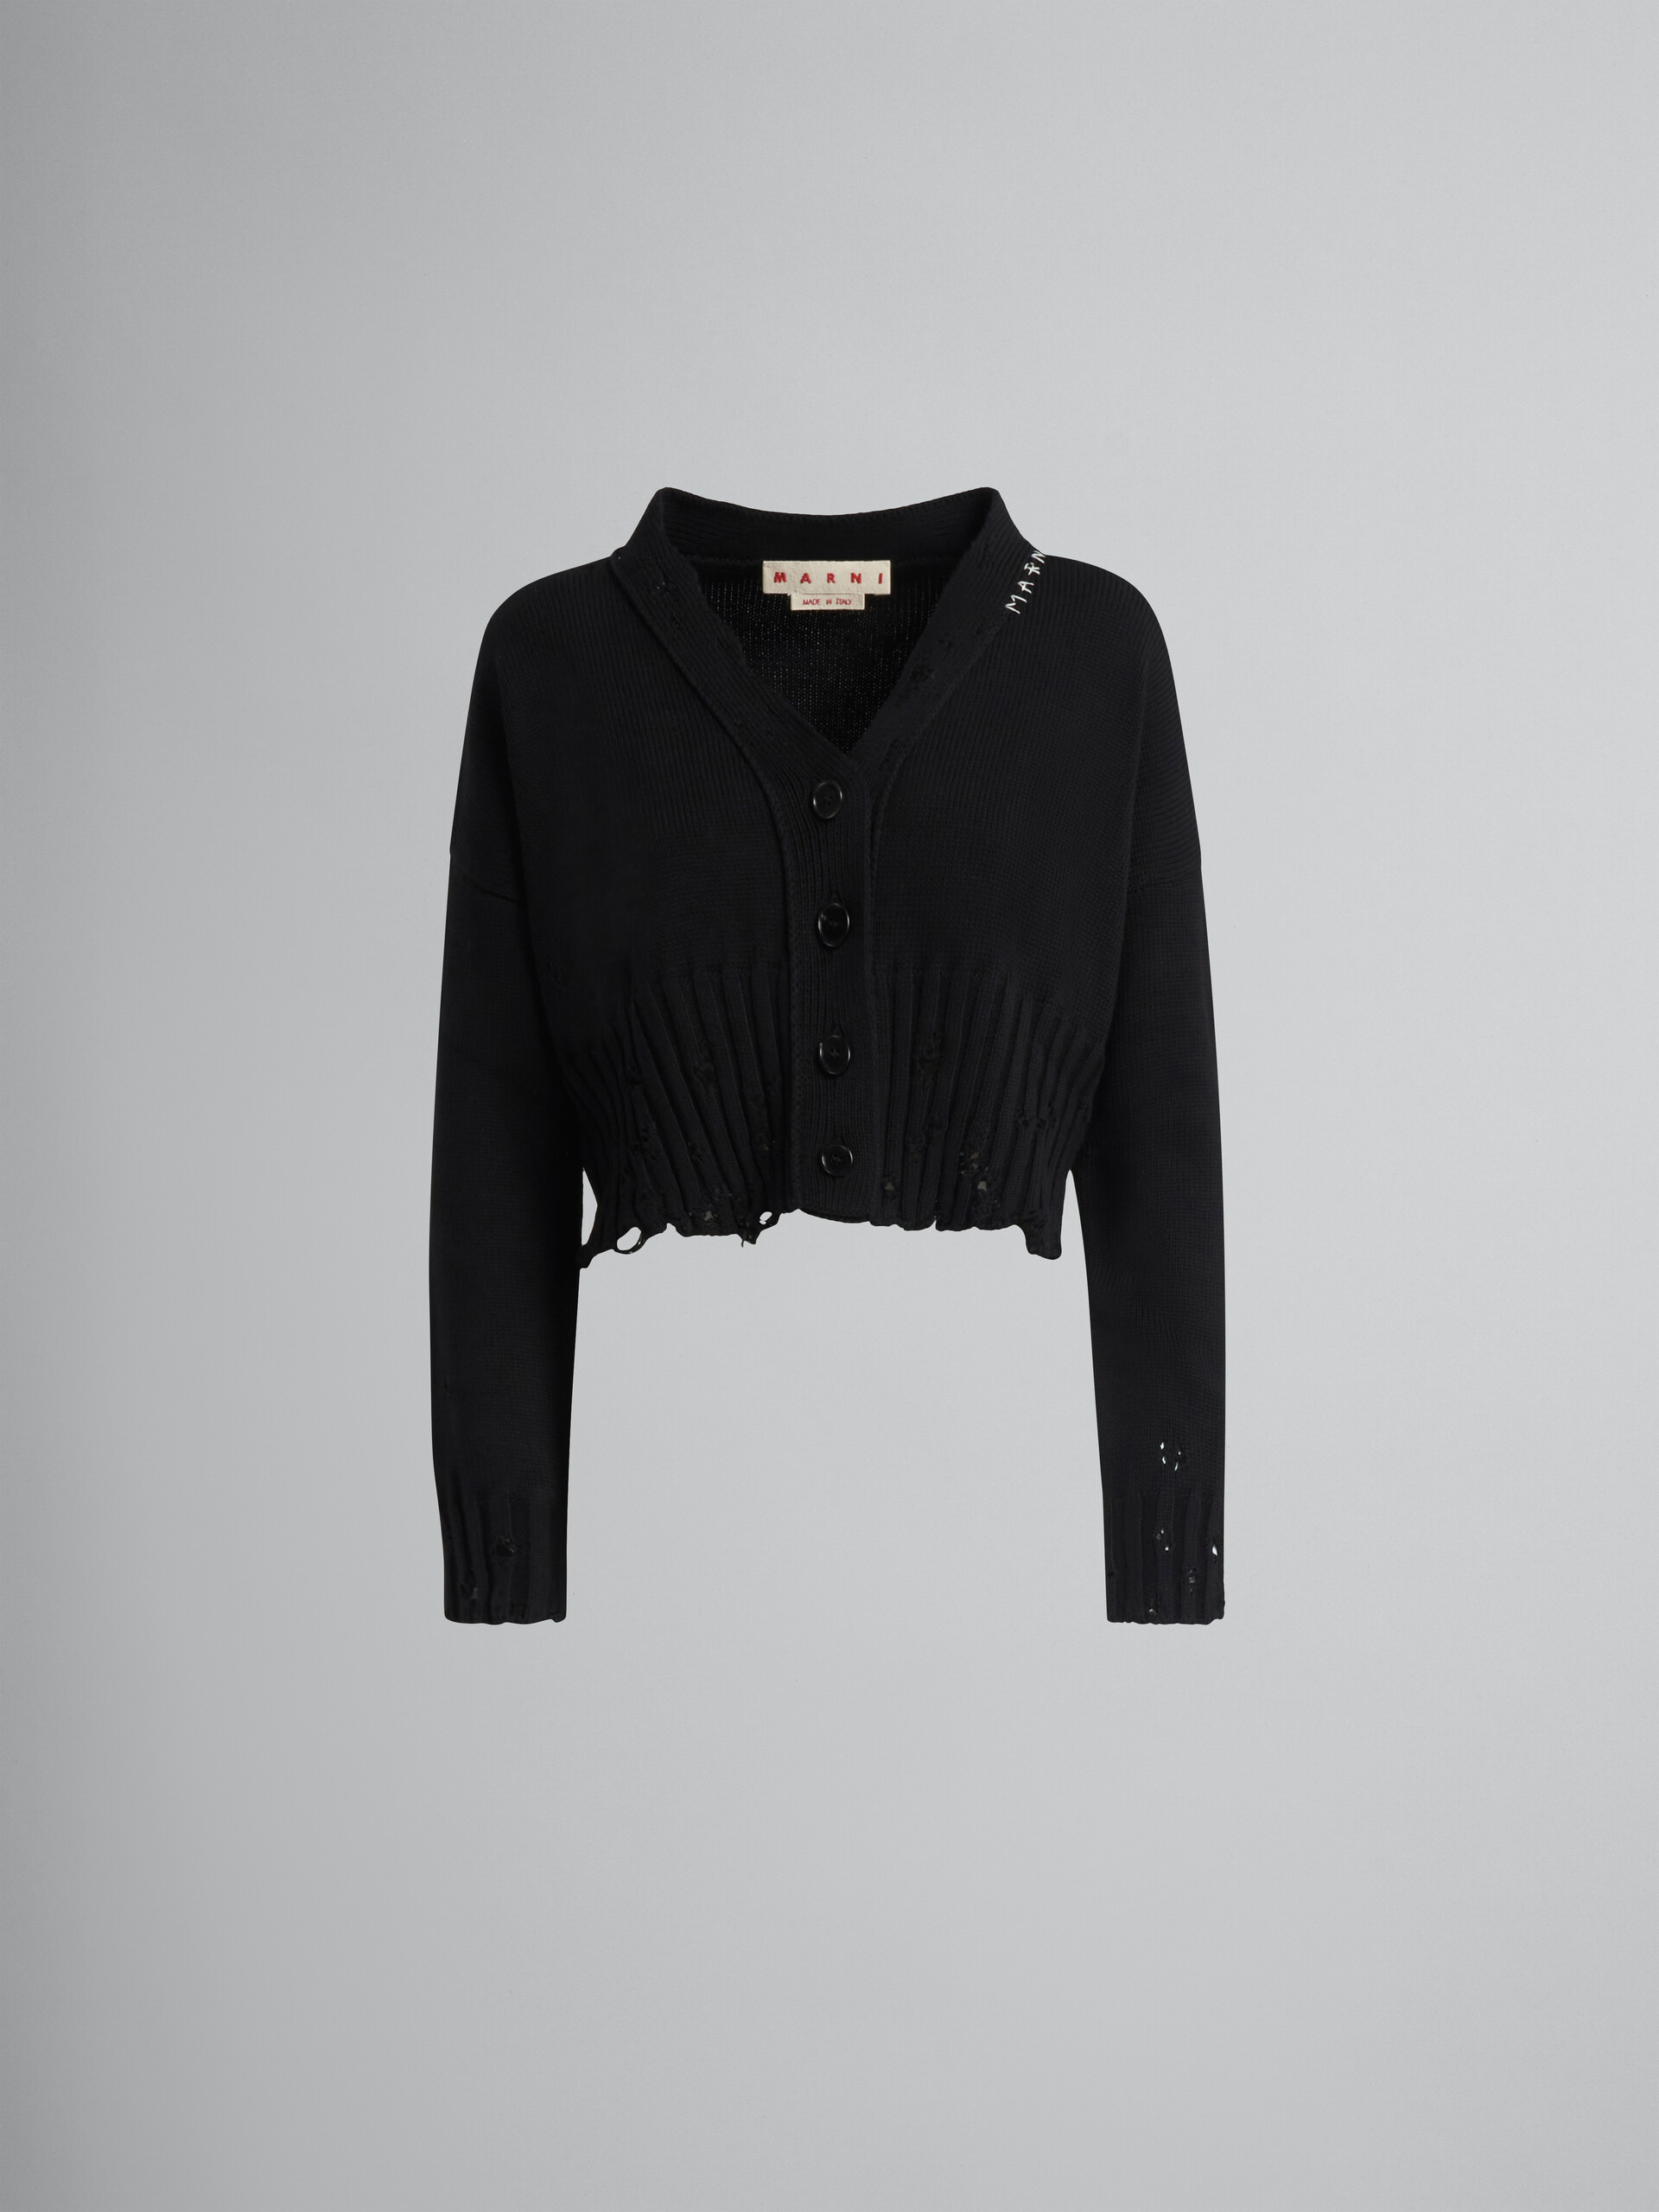 Black cotton cropped cardigan - Pullovers - Image 1